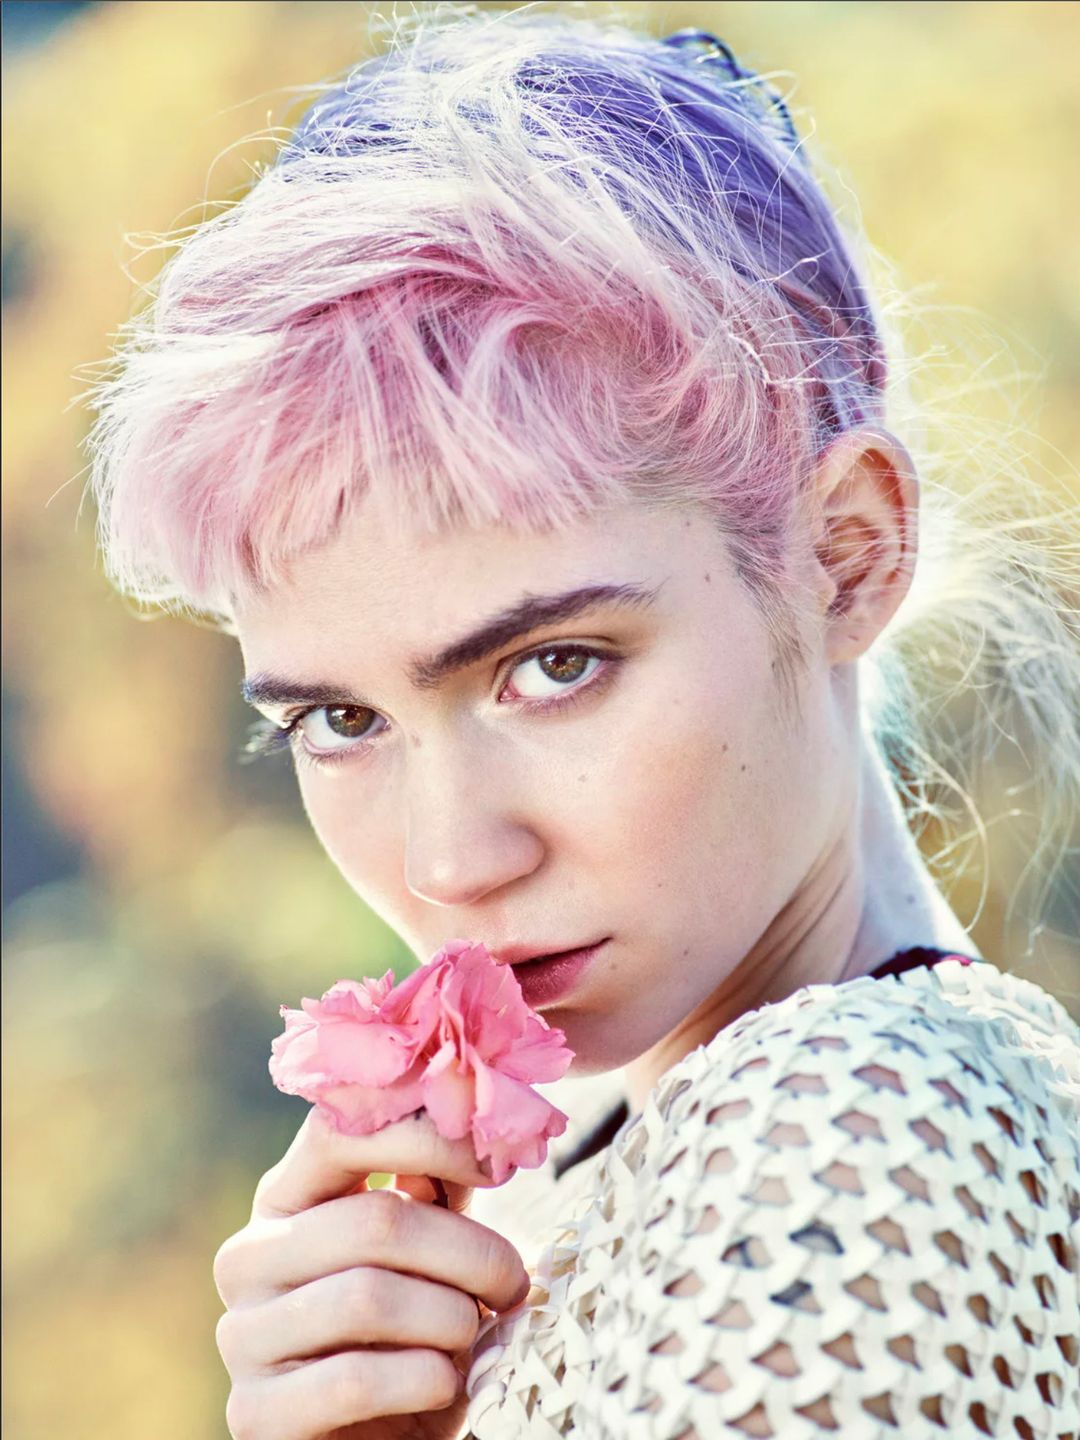 Grimes appearance